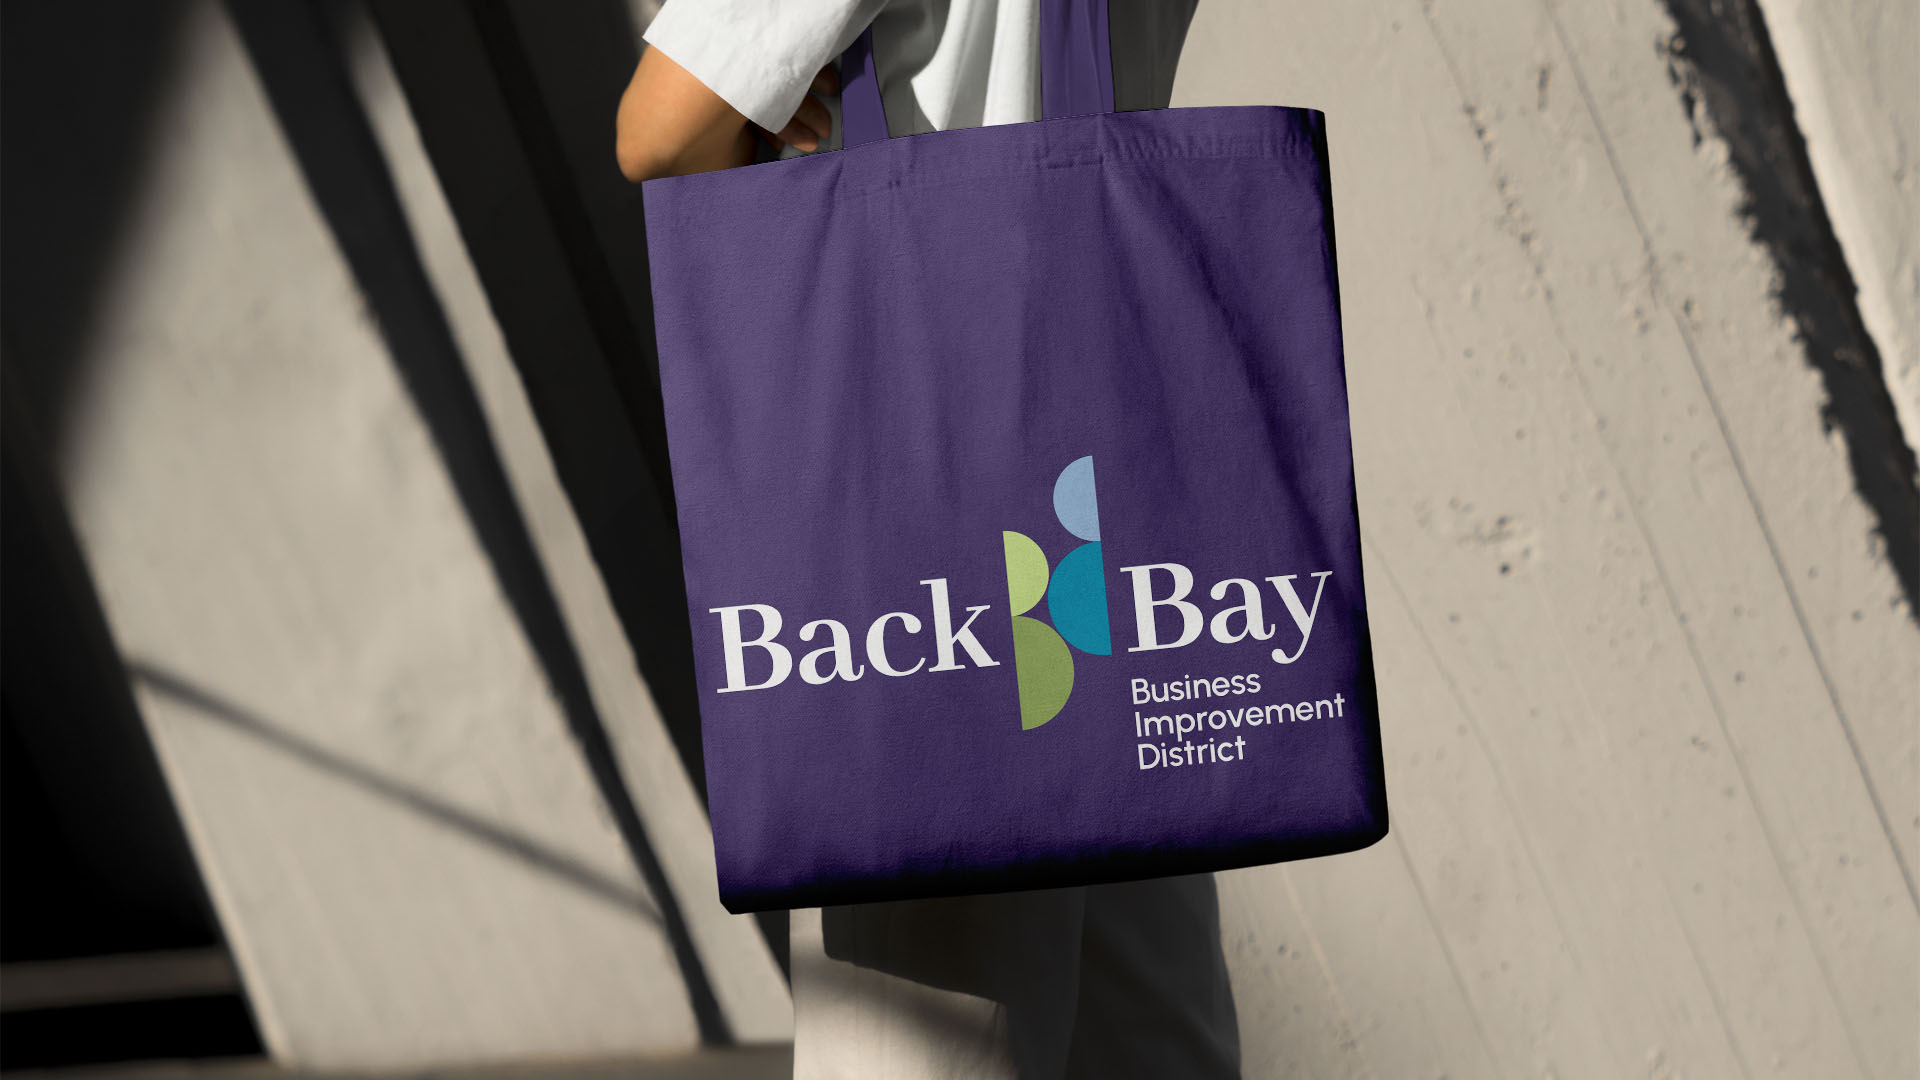 back bay business district logo on purple tote